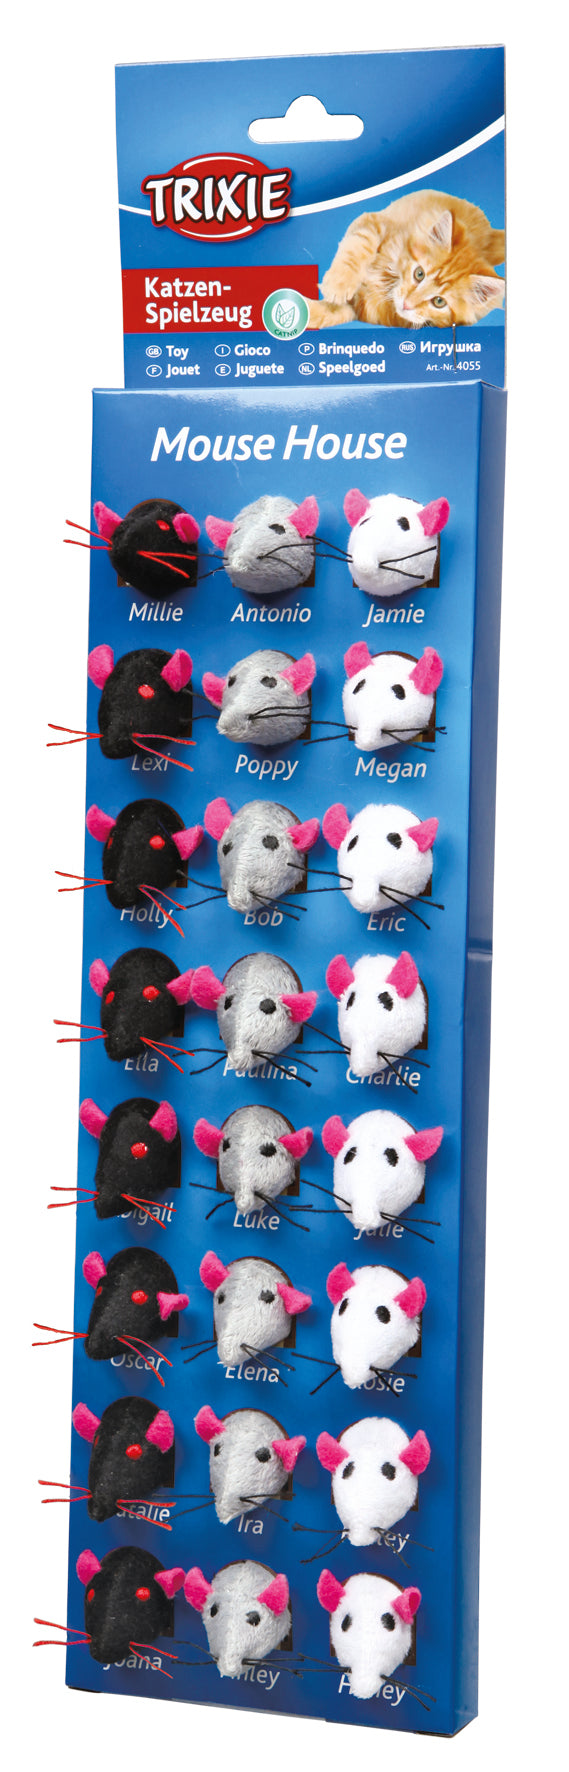 24 Assortment Mouse House